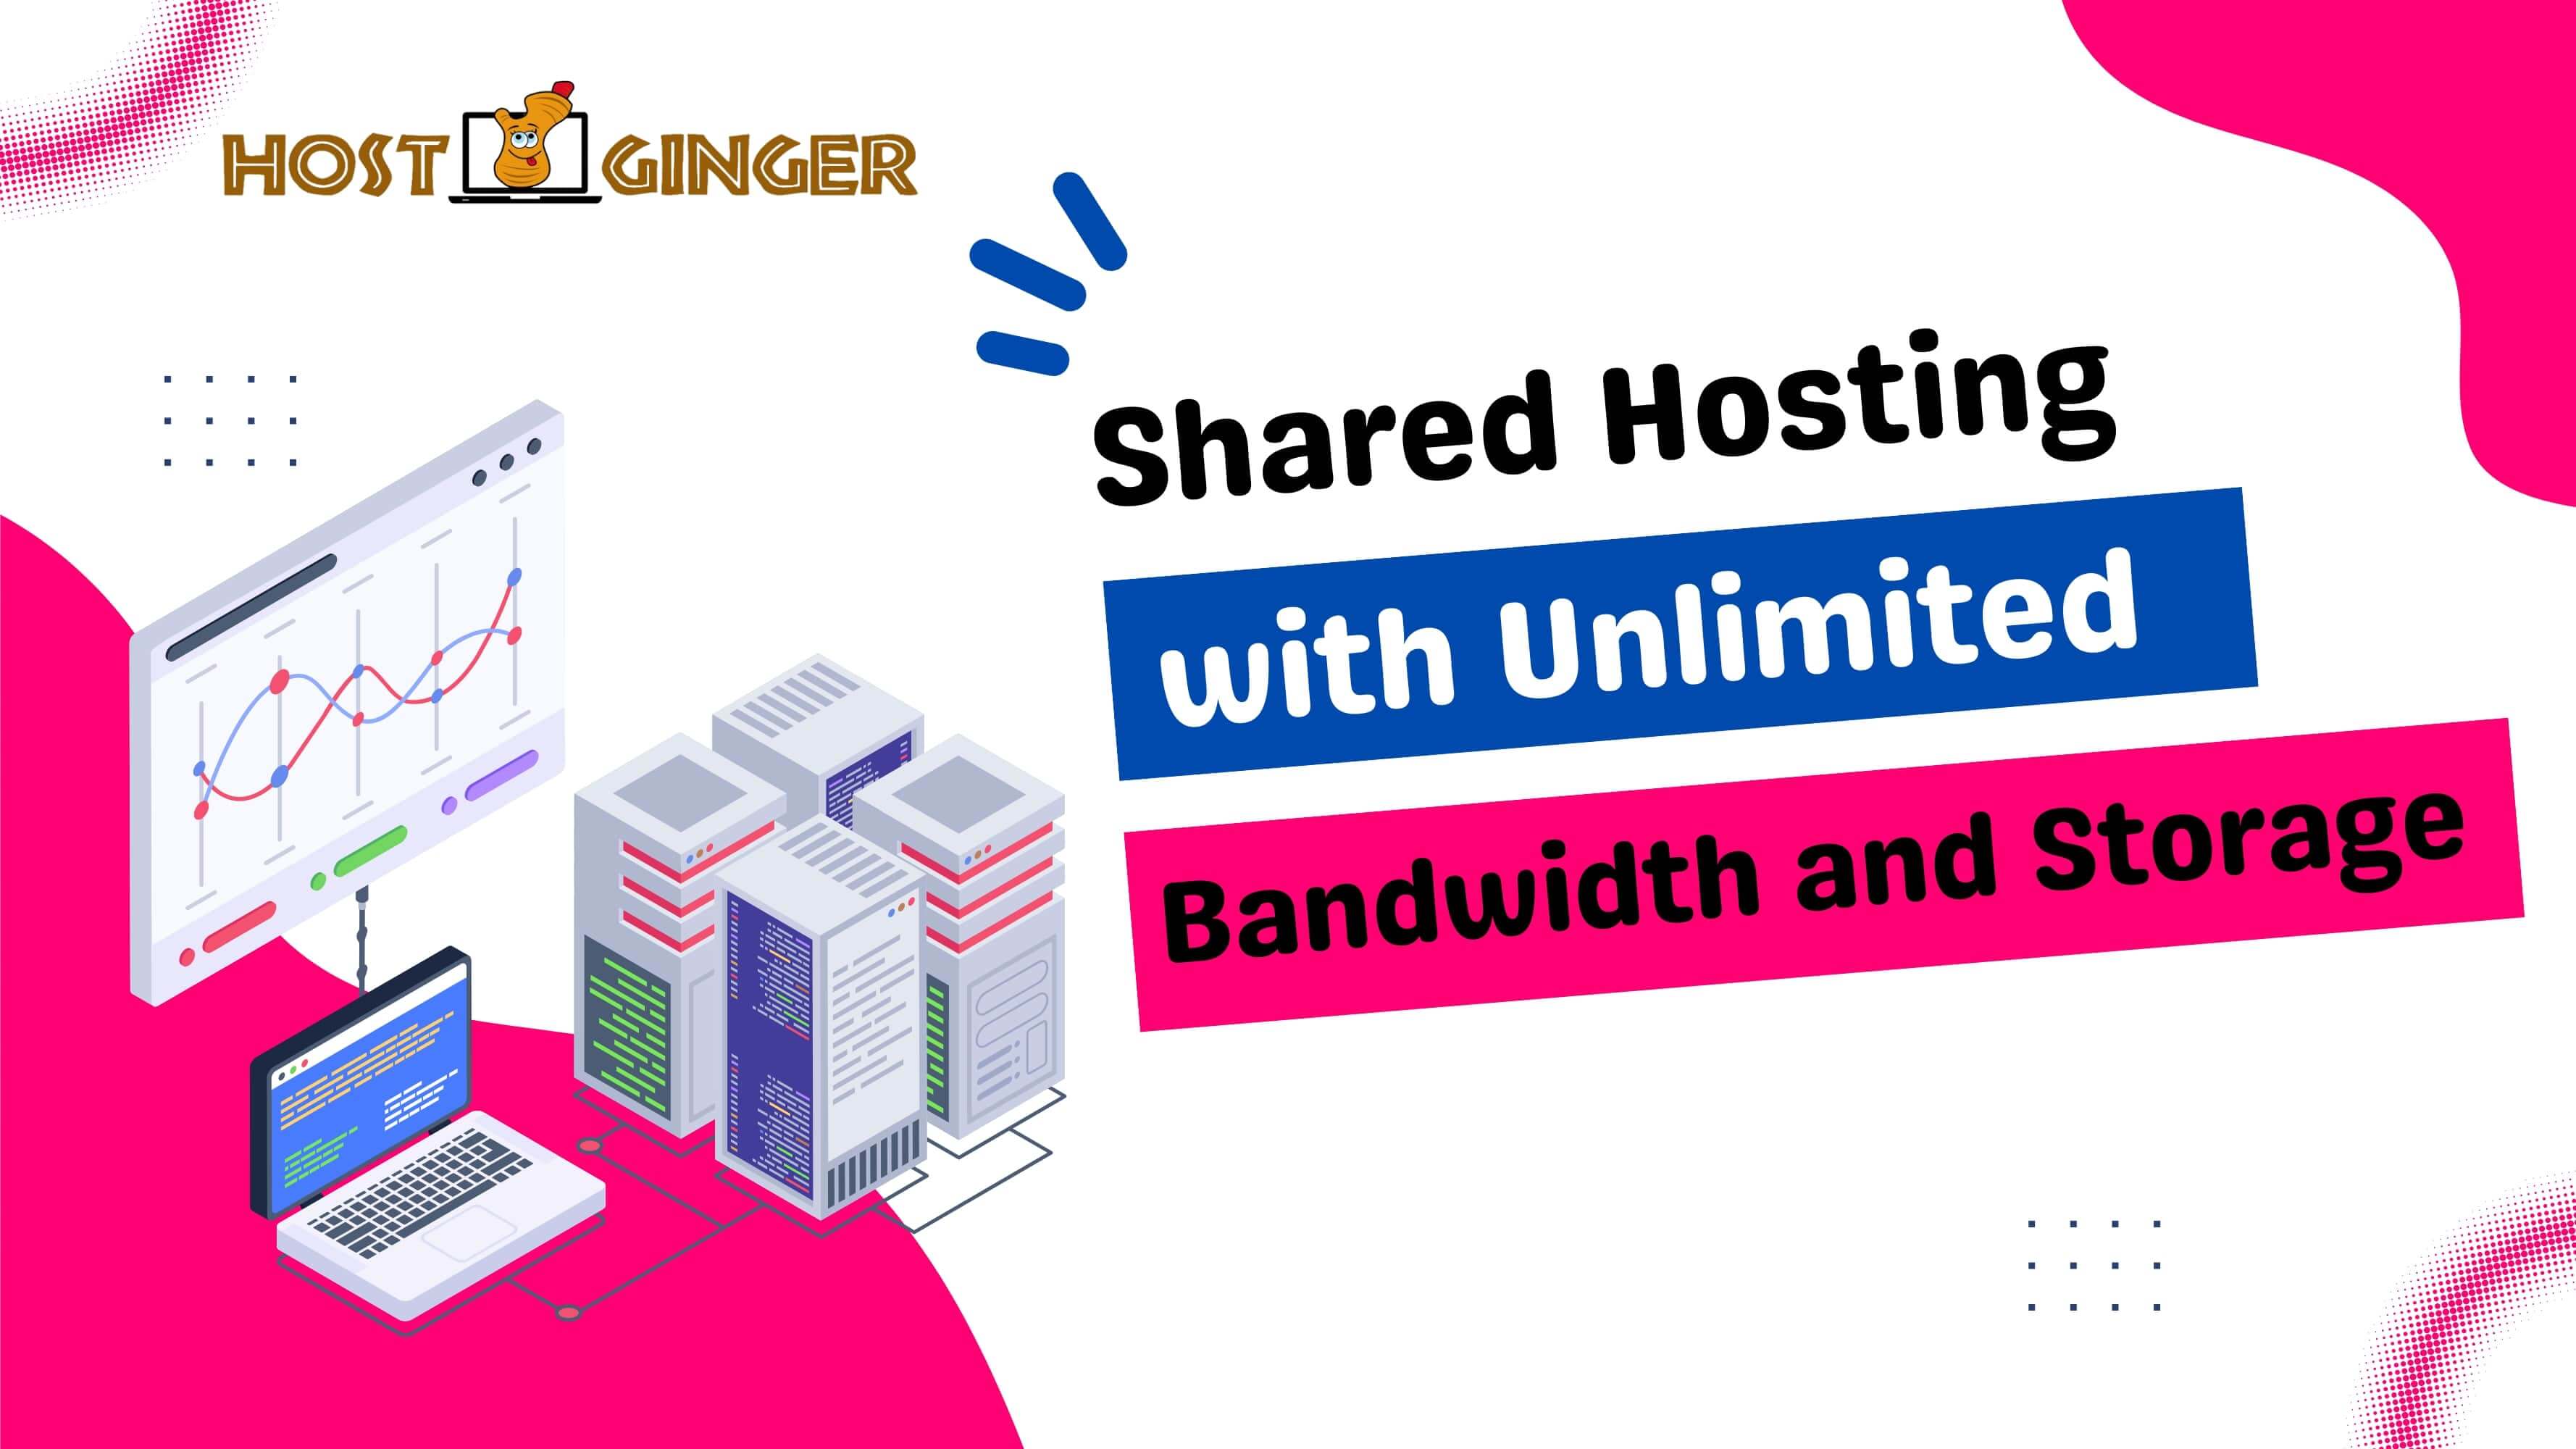 Shared Hosting with Unlimited Bandwidth and Storage